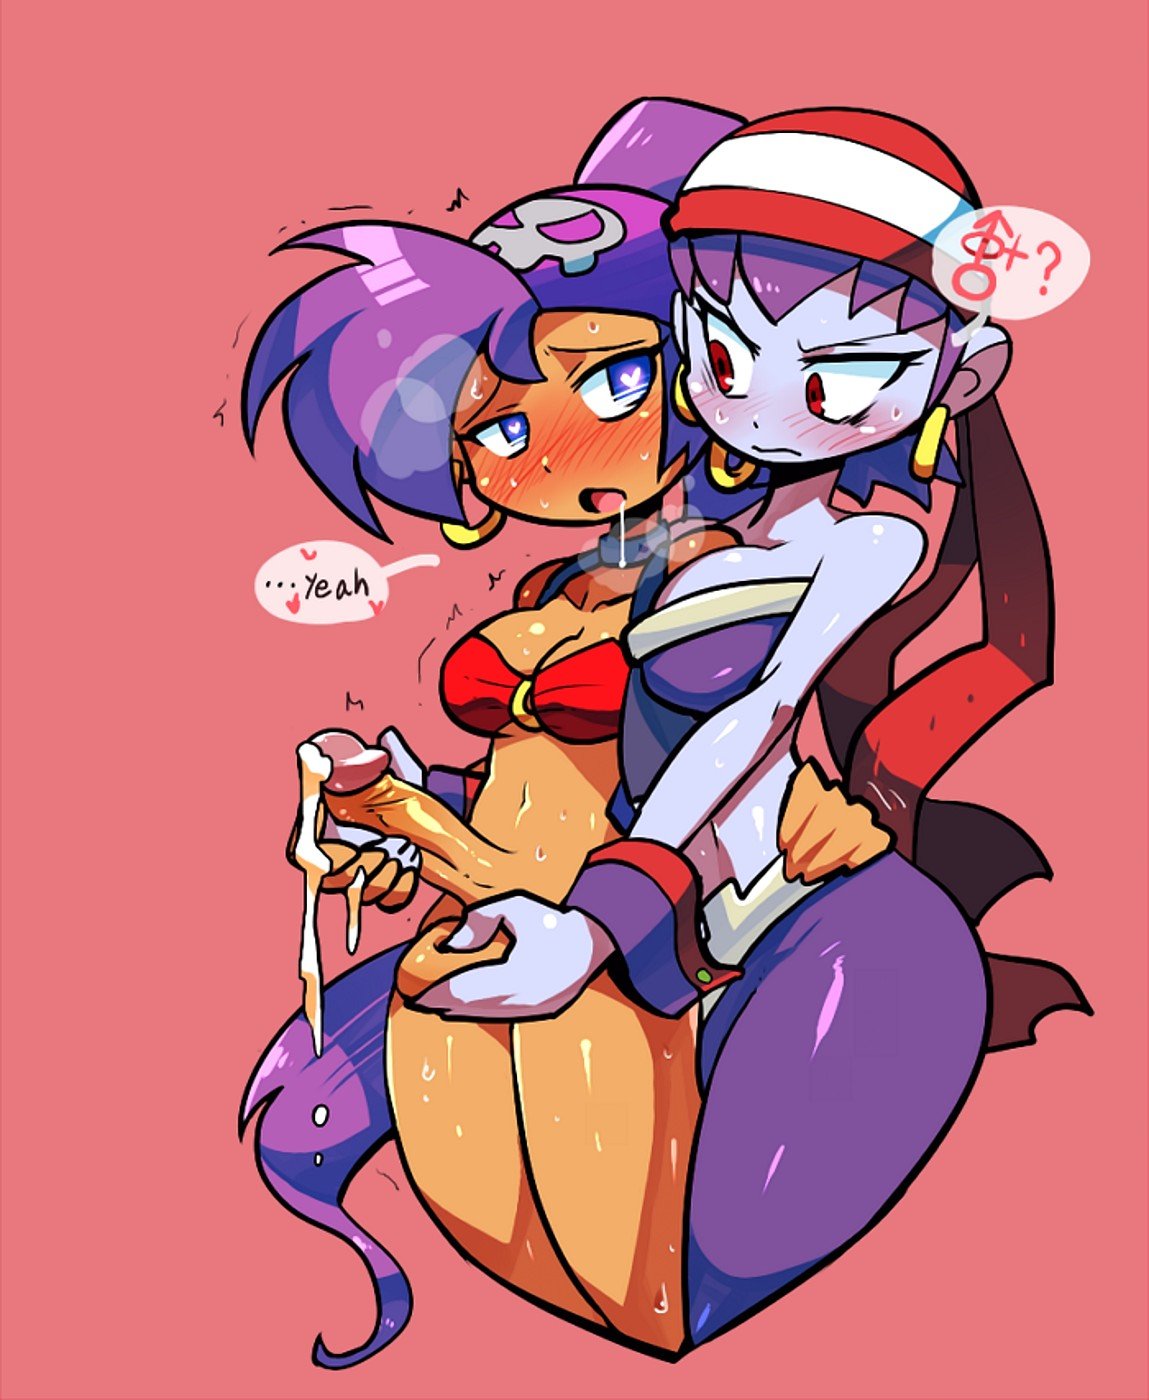 Cold F. recomended bitch genie gives good shantae half